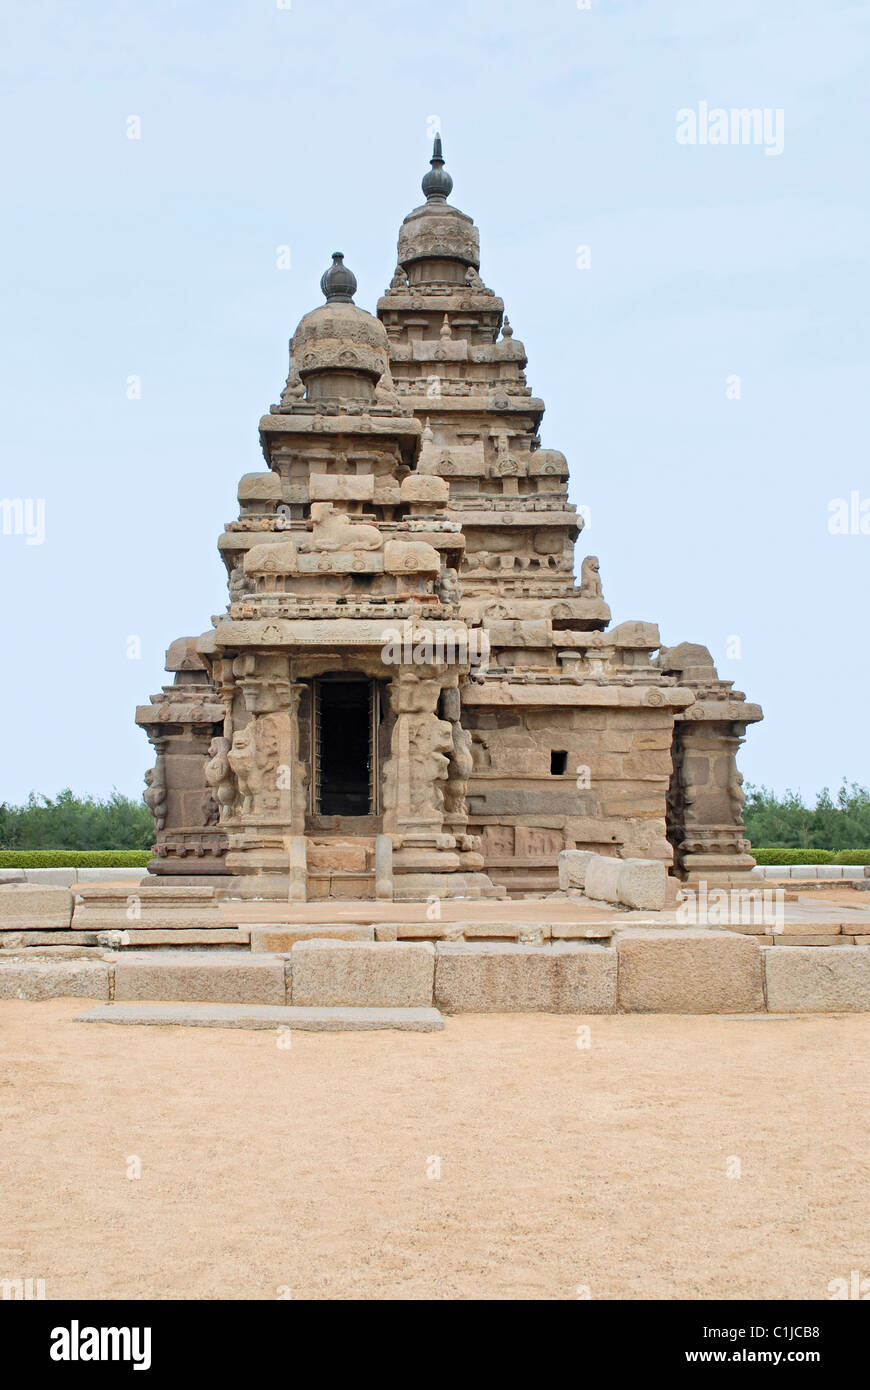 General  view of Shore temple, Mahabalipuram, Tamilnadu, India. It has been classified as a UNESCO World Heritage Site. Stock Photo